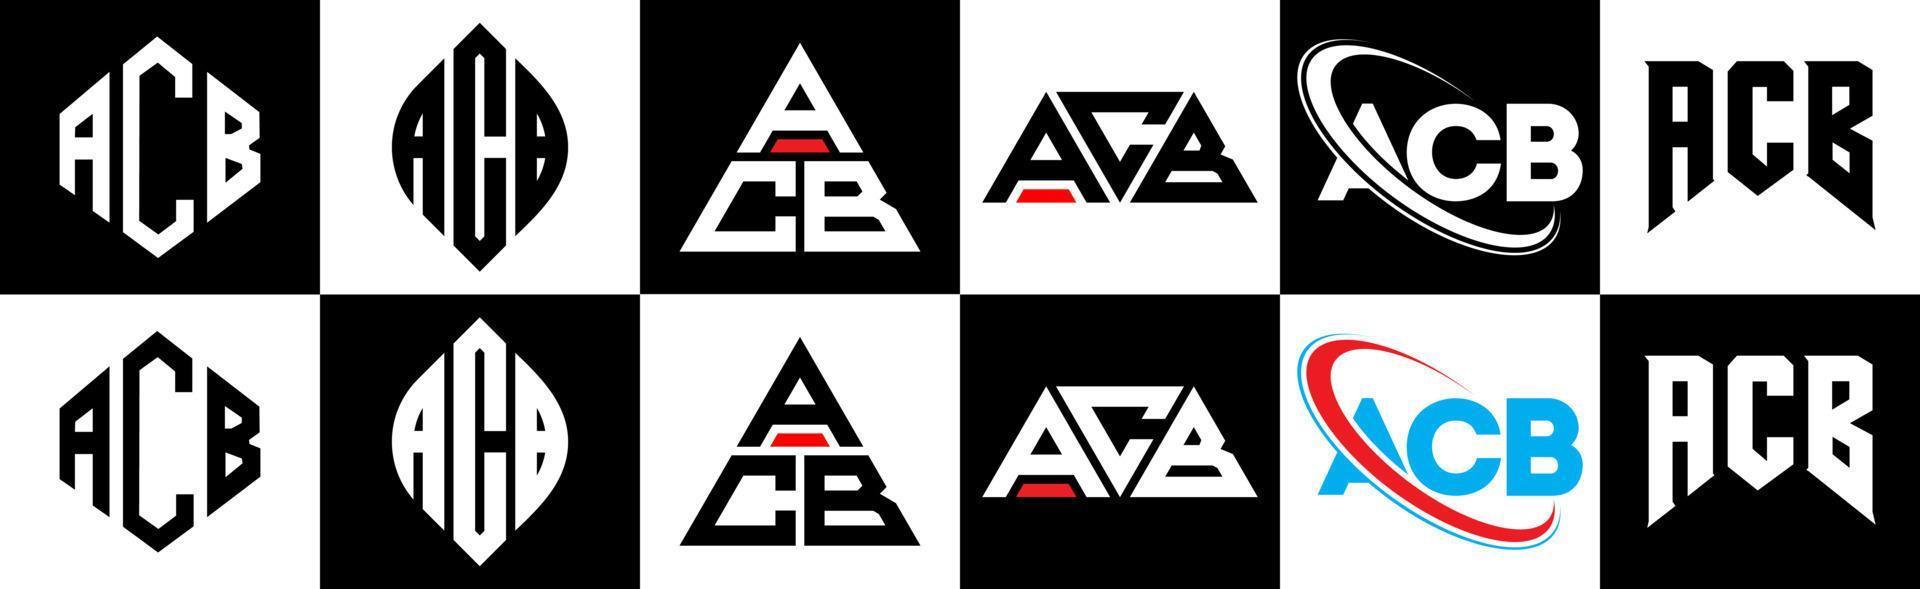 ACB letter logo design in six style. ACB polygon, circle, triangle, hexagon, flat and simple style with black and white color variation letter logo set in one artboard. ACB minimalist and classic logo vector